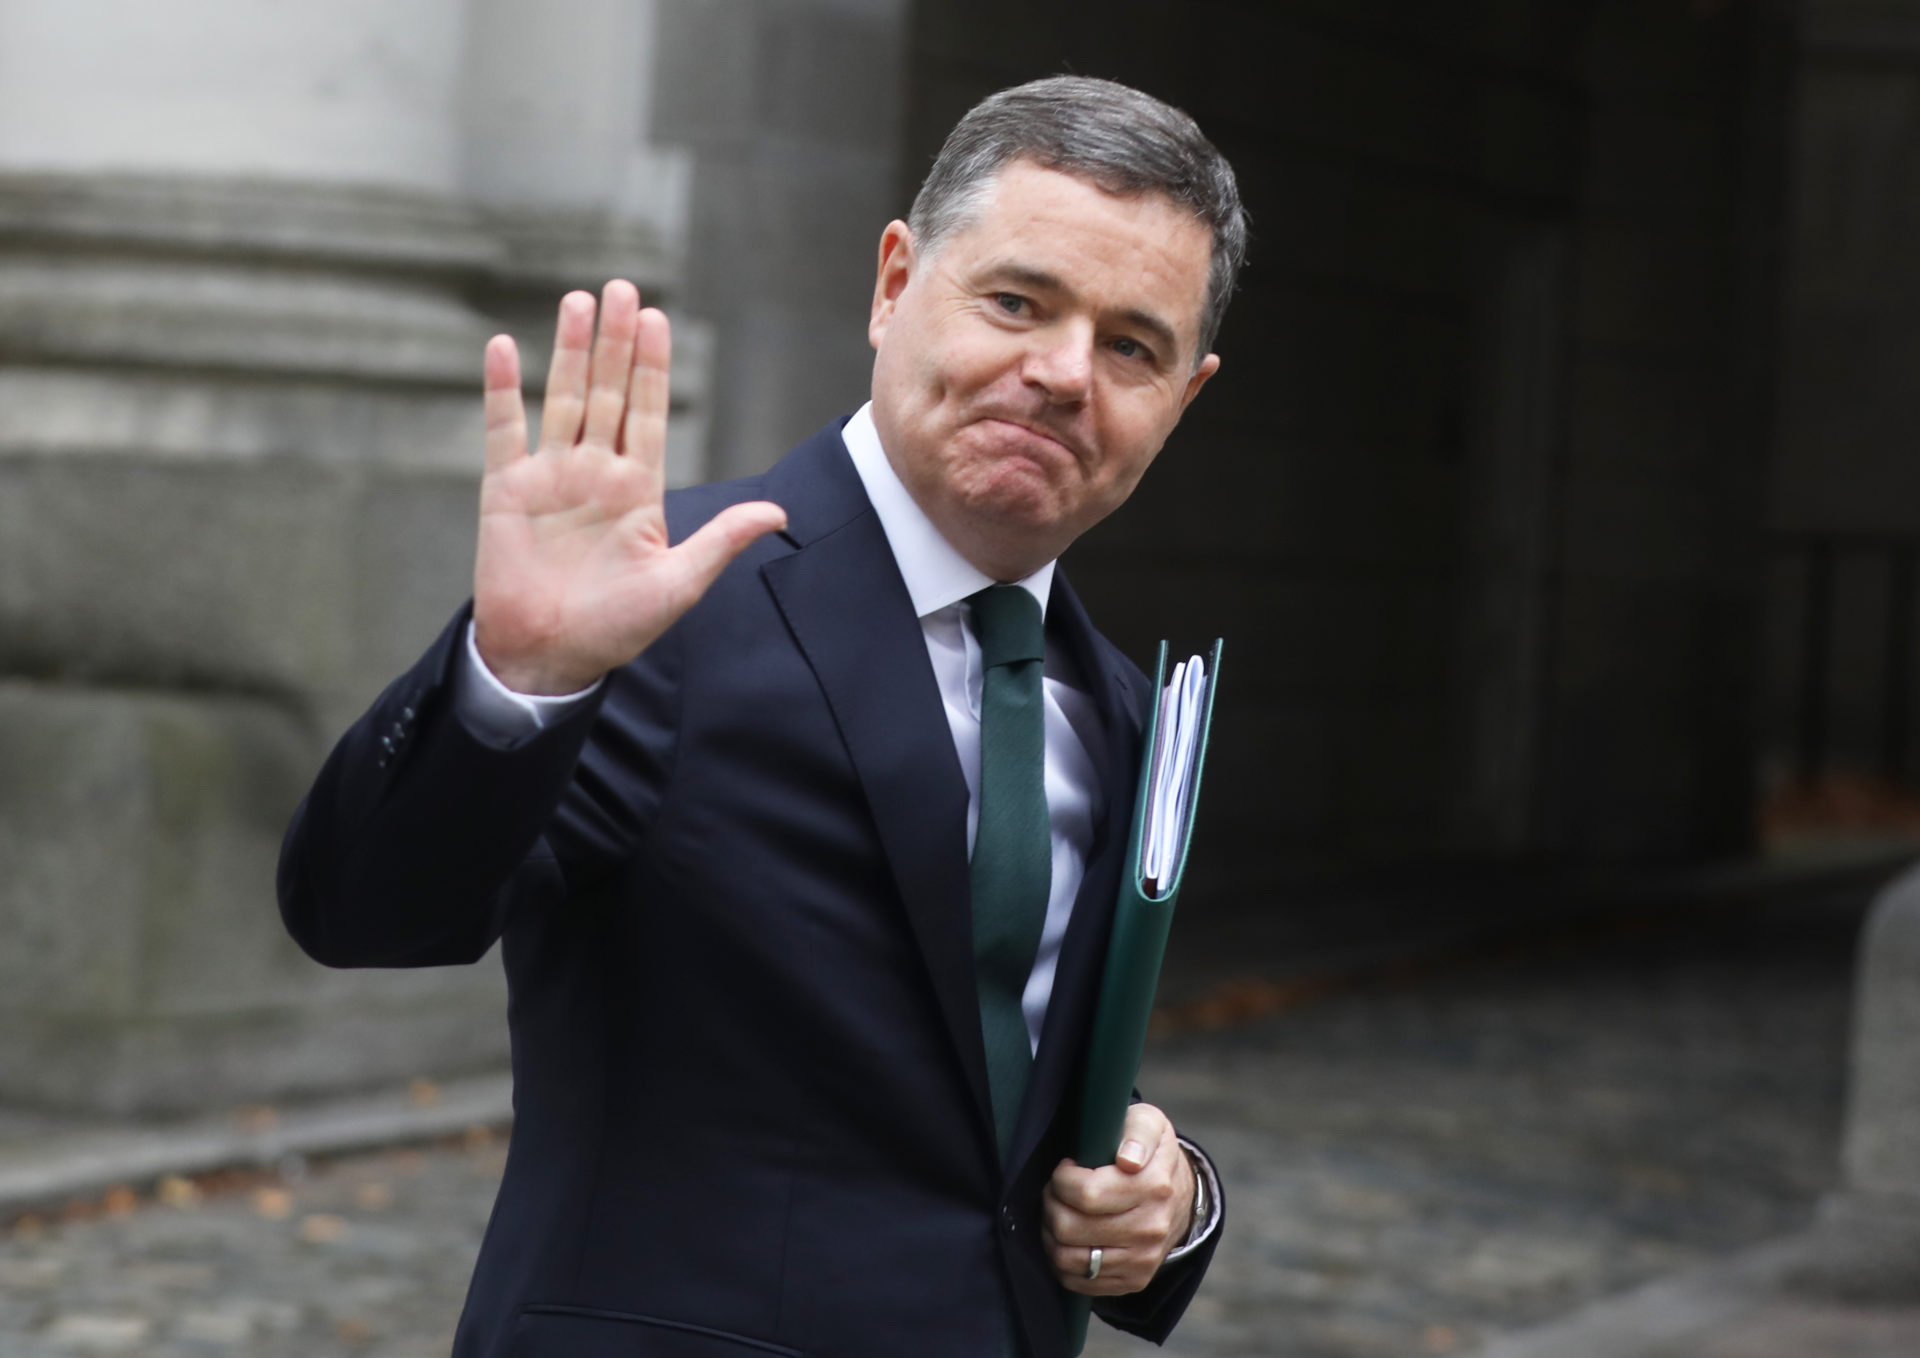 Then Finance Minister Paschal Donohoe waving, 27-09-2022. Image: Leah Farrell/RollingNews